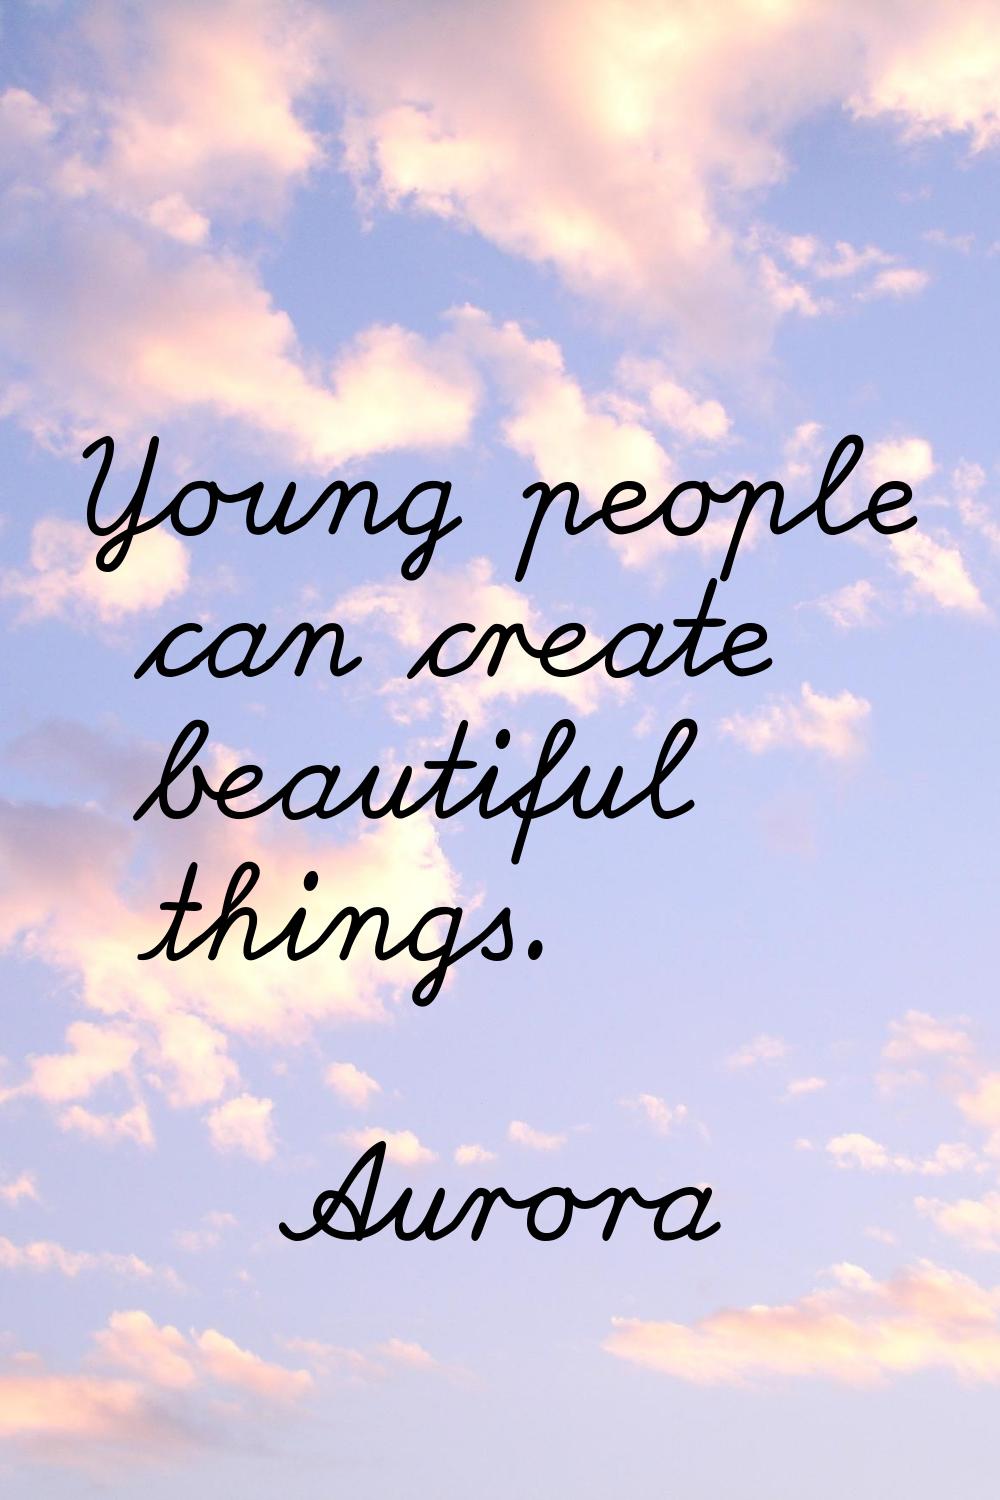 Young people can create beautiful things.